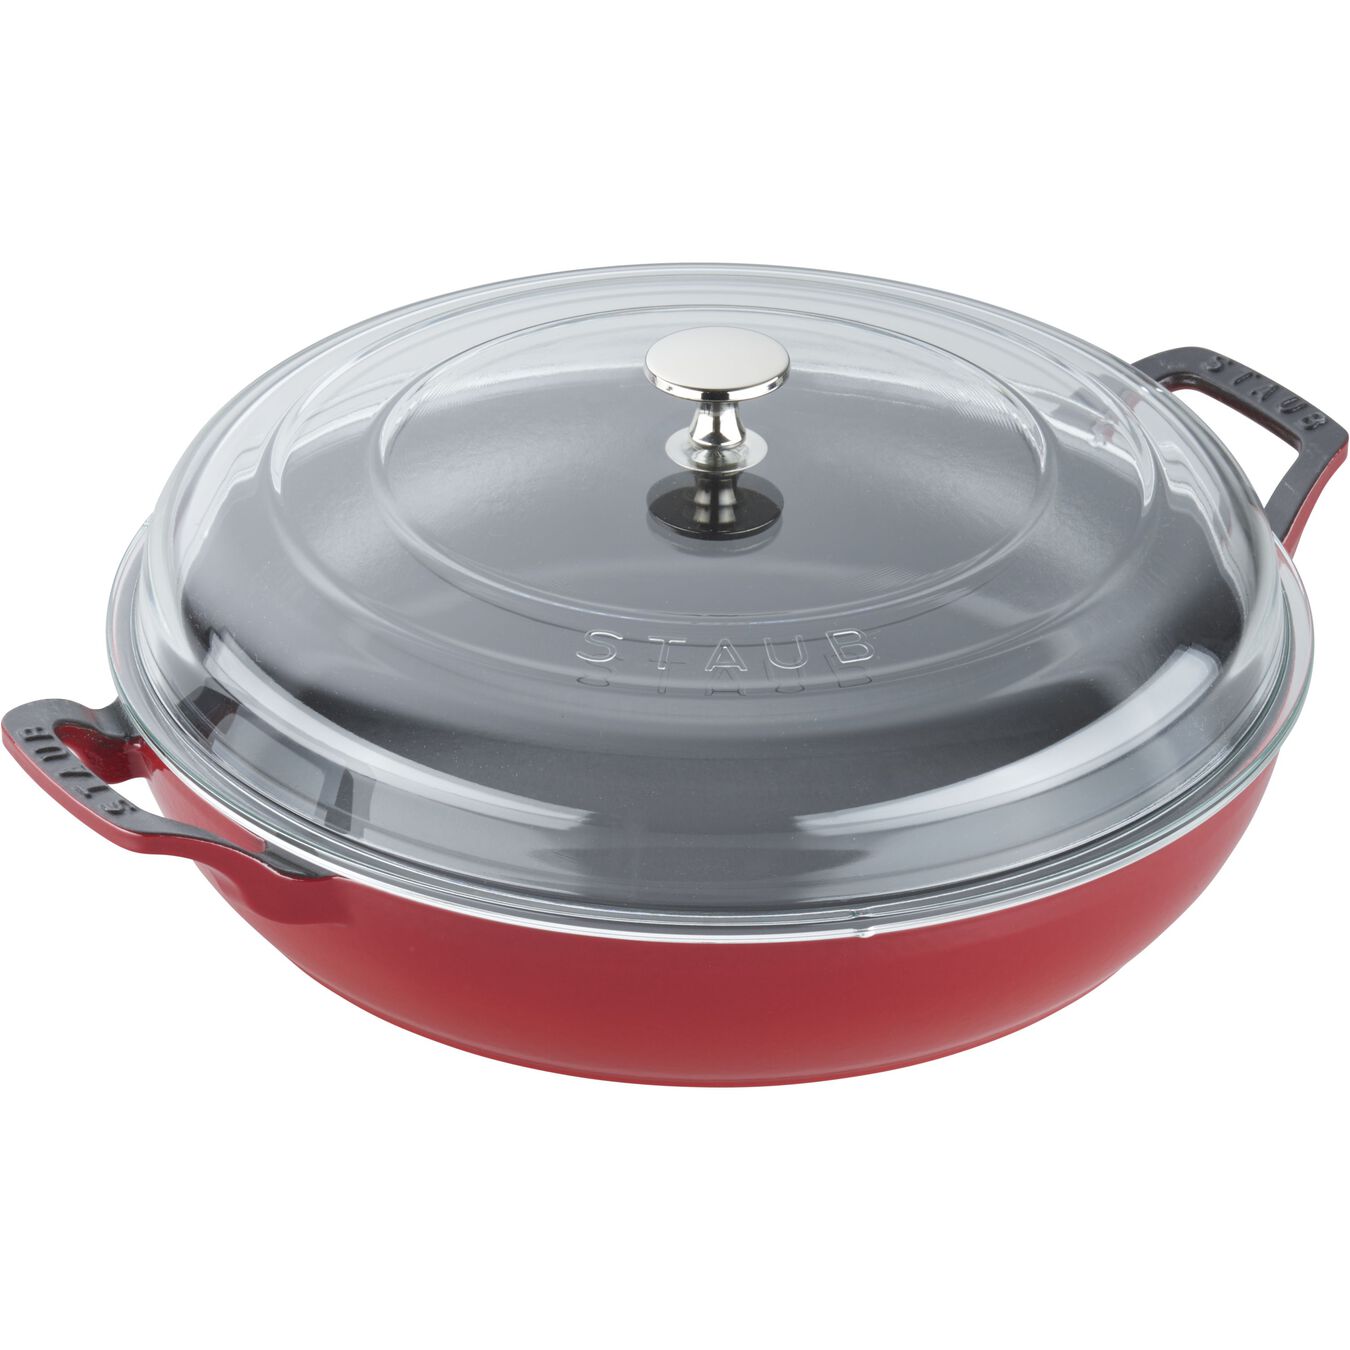 3.5 l cast iron round Saute pan with glass lid, cherry - Visual Imperfections,,large 3